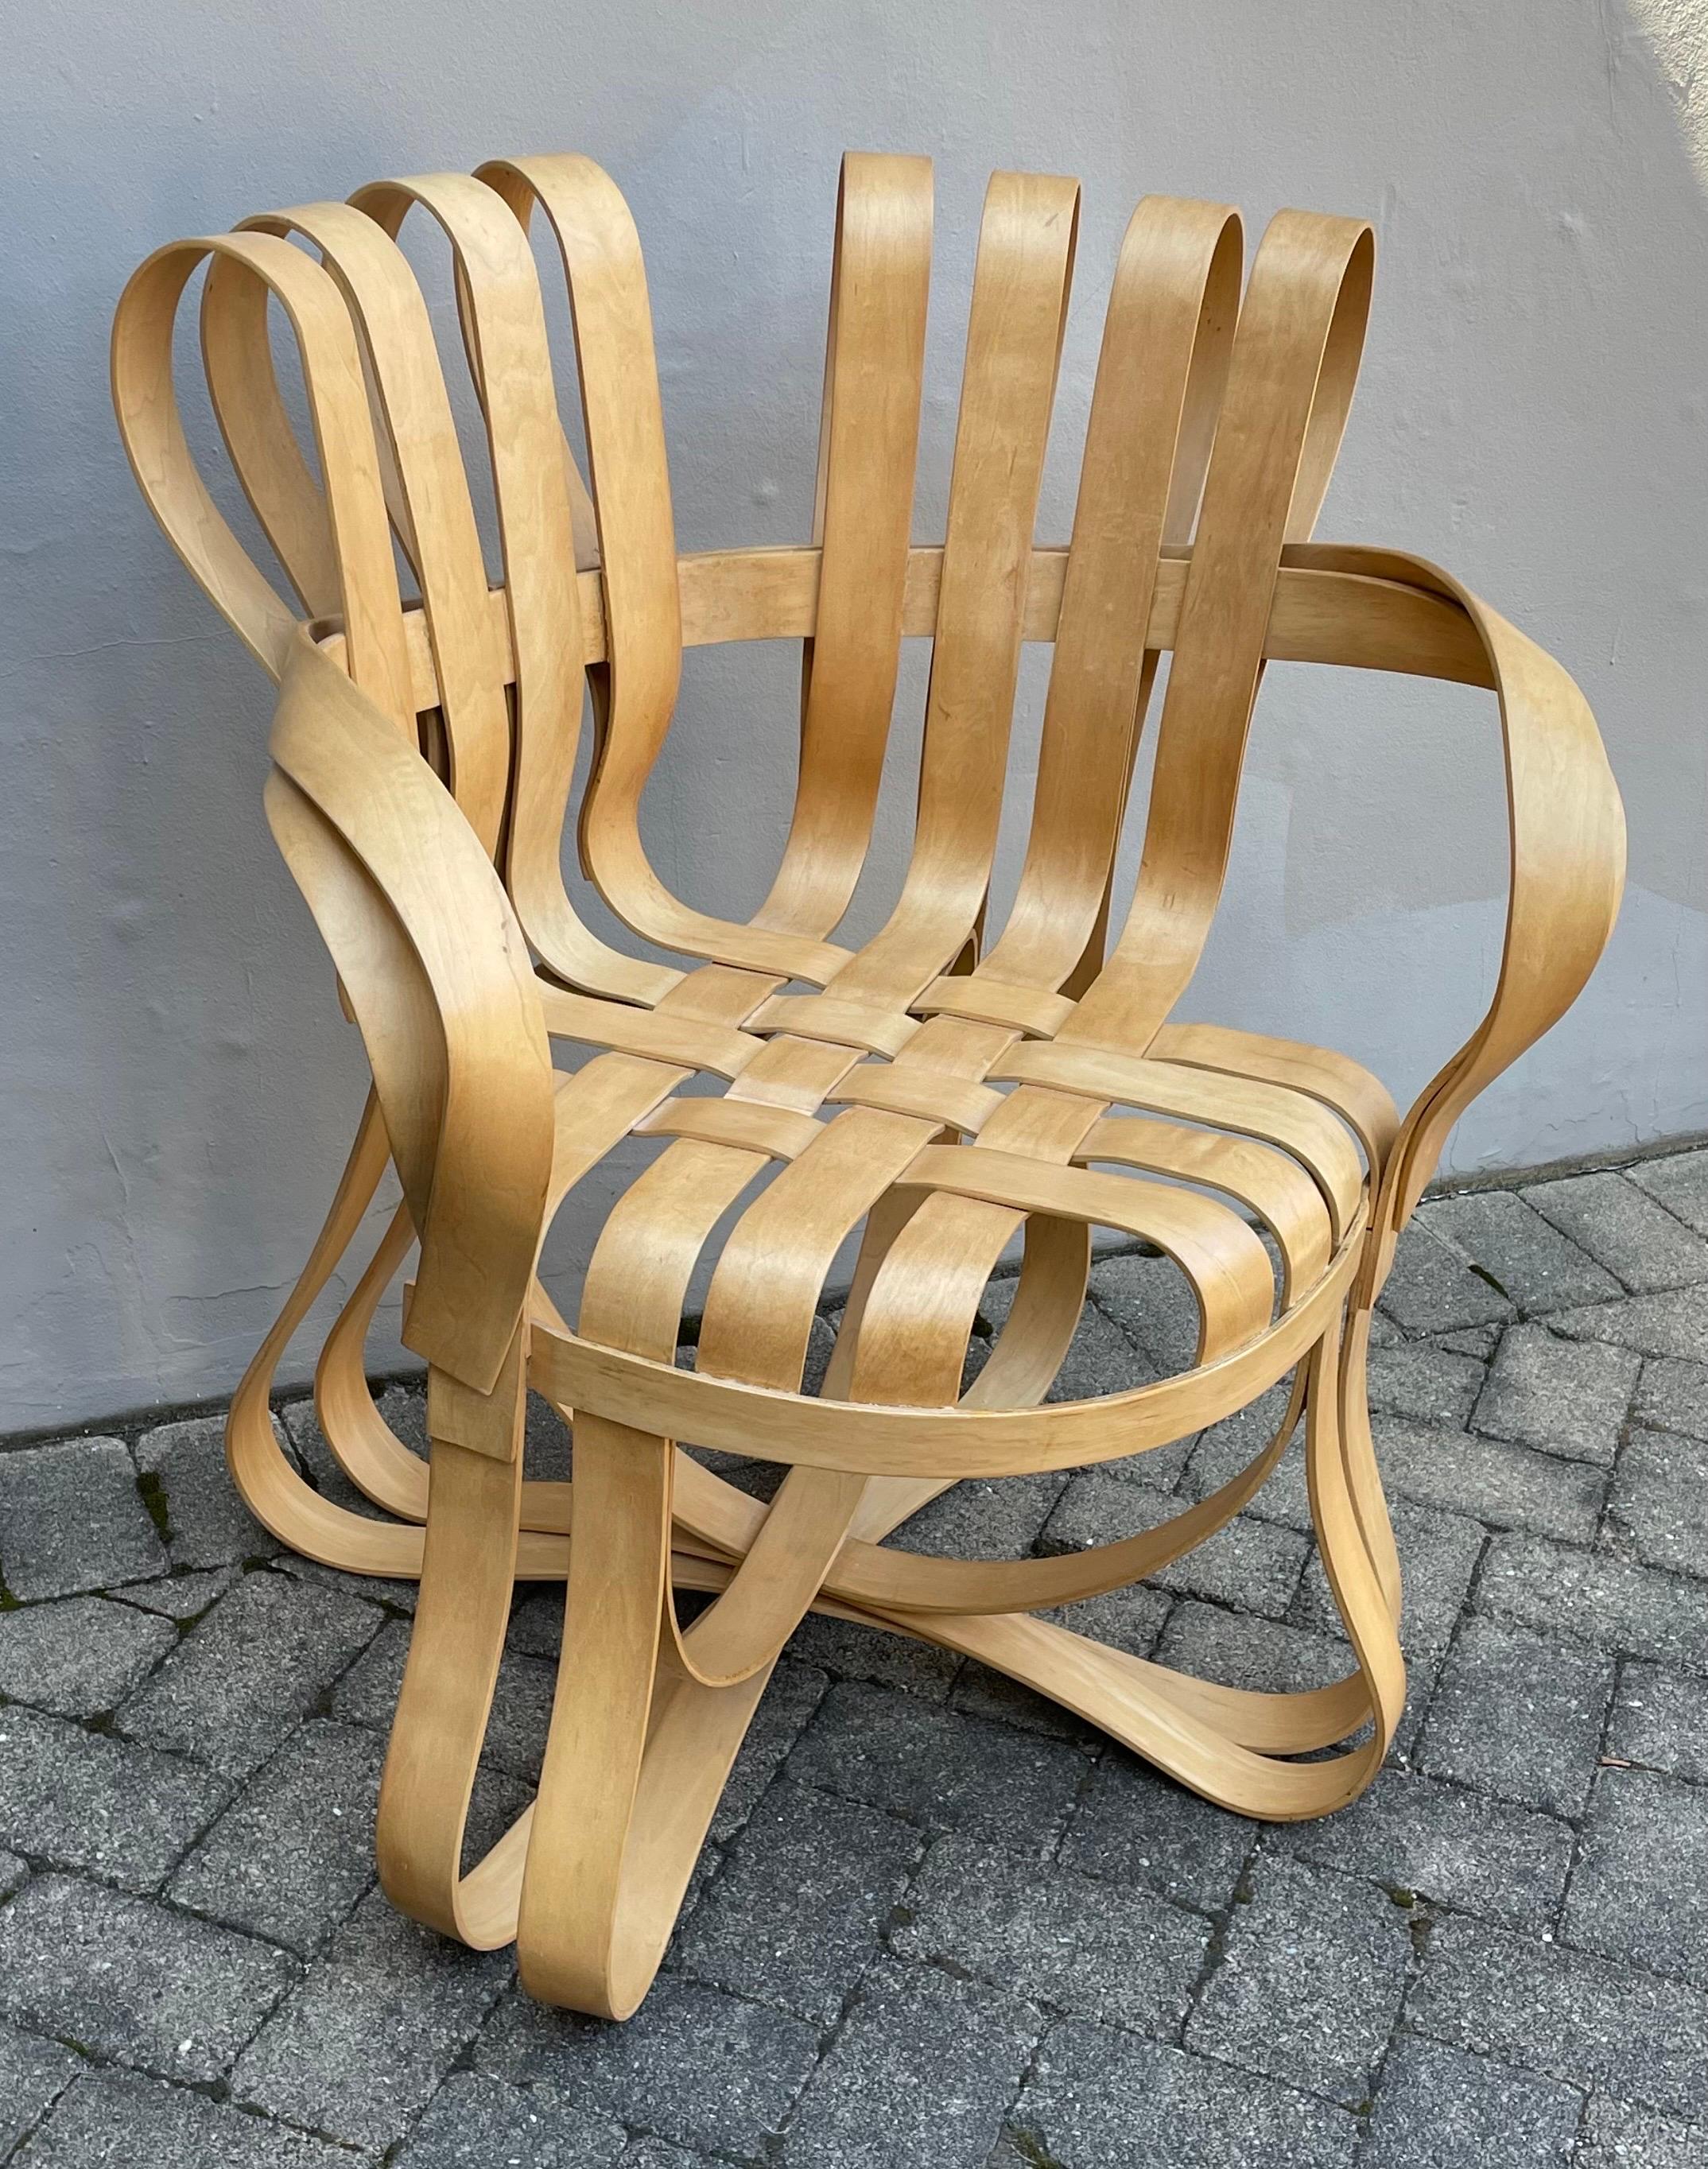 Inspired by the apple crates he had played on as a child, Pritzker Prize-winning architect Frank Gehry created the ribbon-like design of the Cross Check chair with interwoven maple strips. The graceful design integrates material with structure,